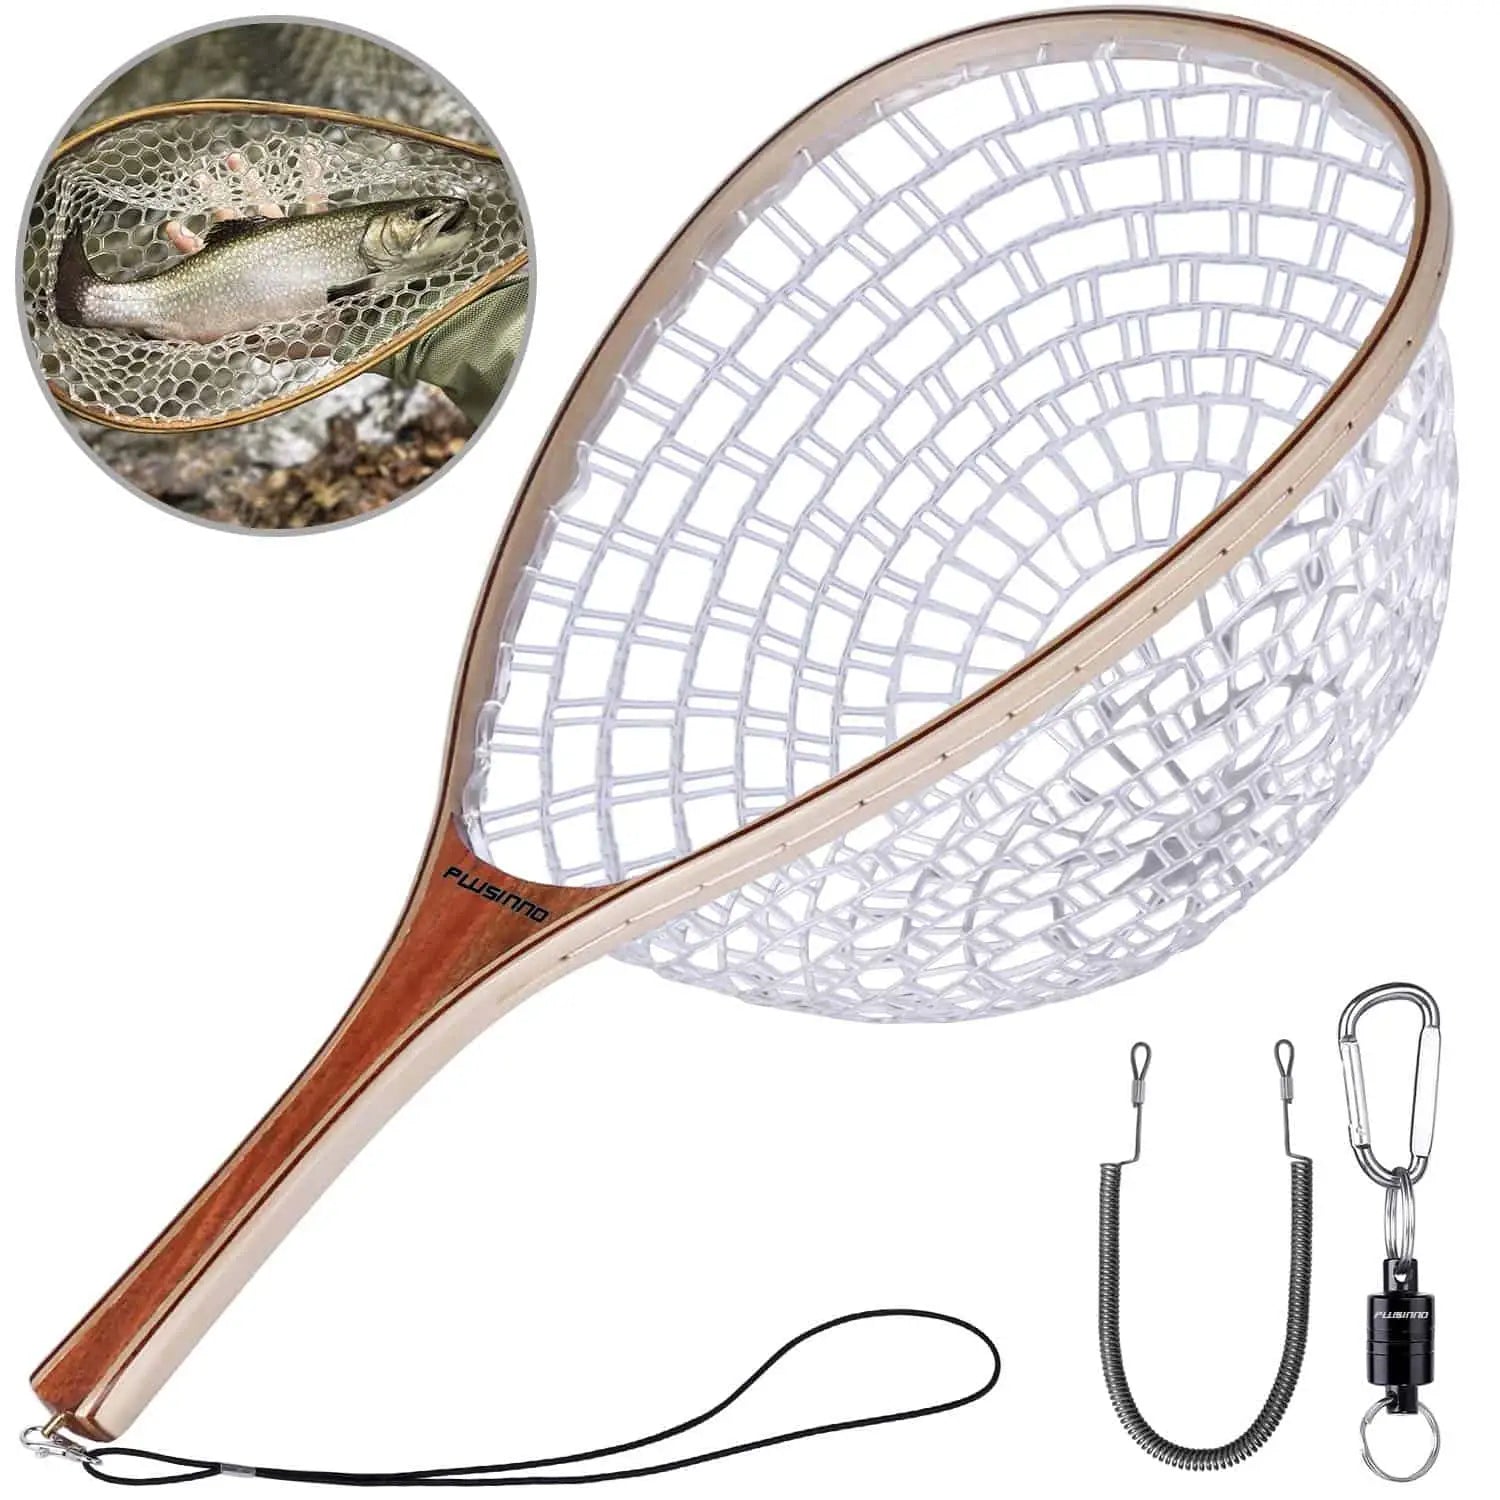 Black Paw Floating Fishing Net, Fish Landing Net with Built in Length Scale